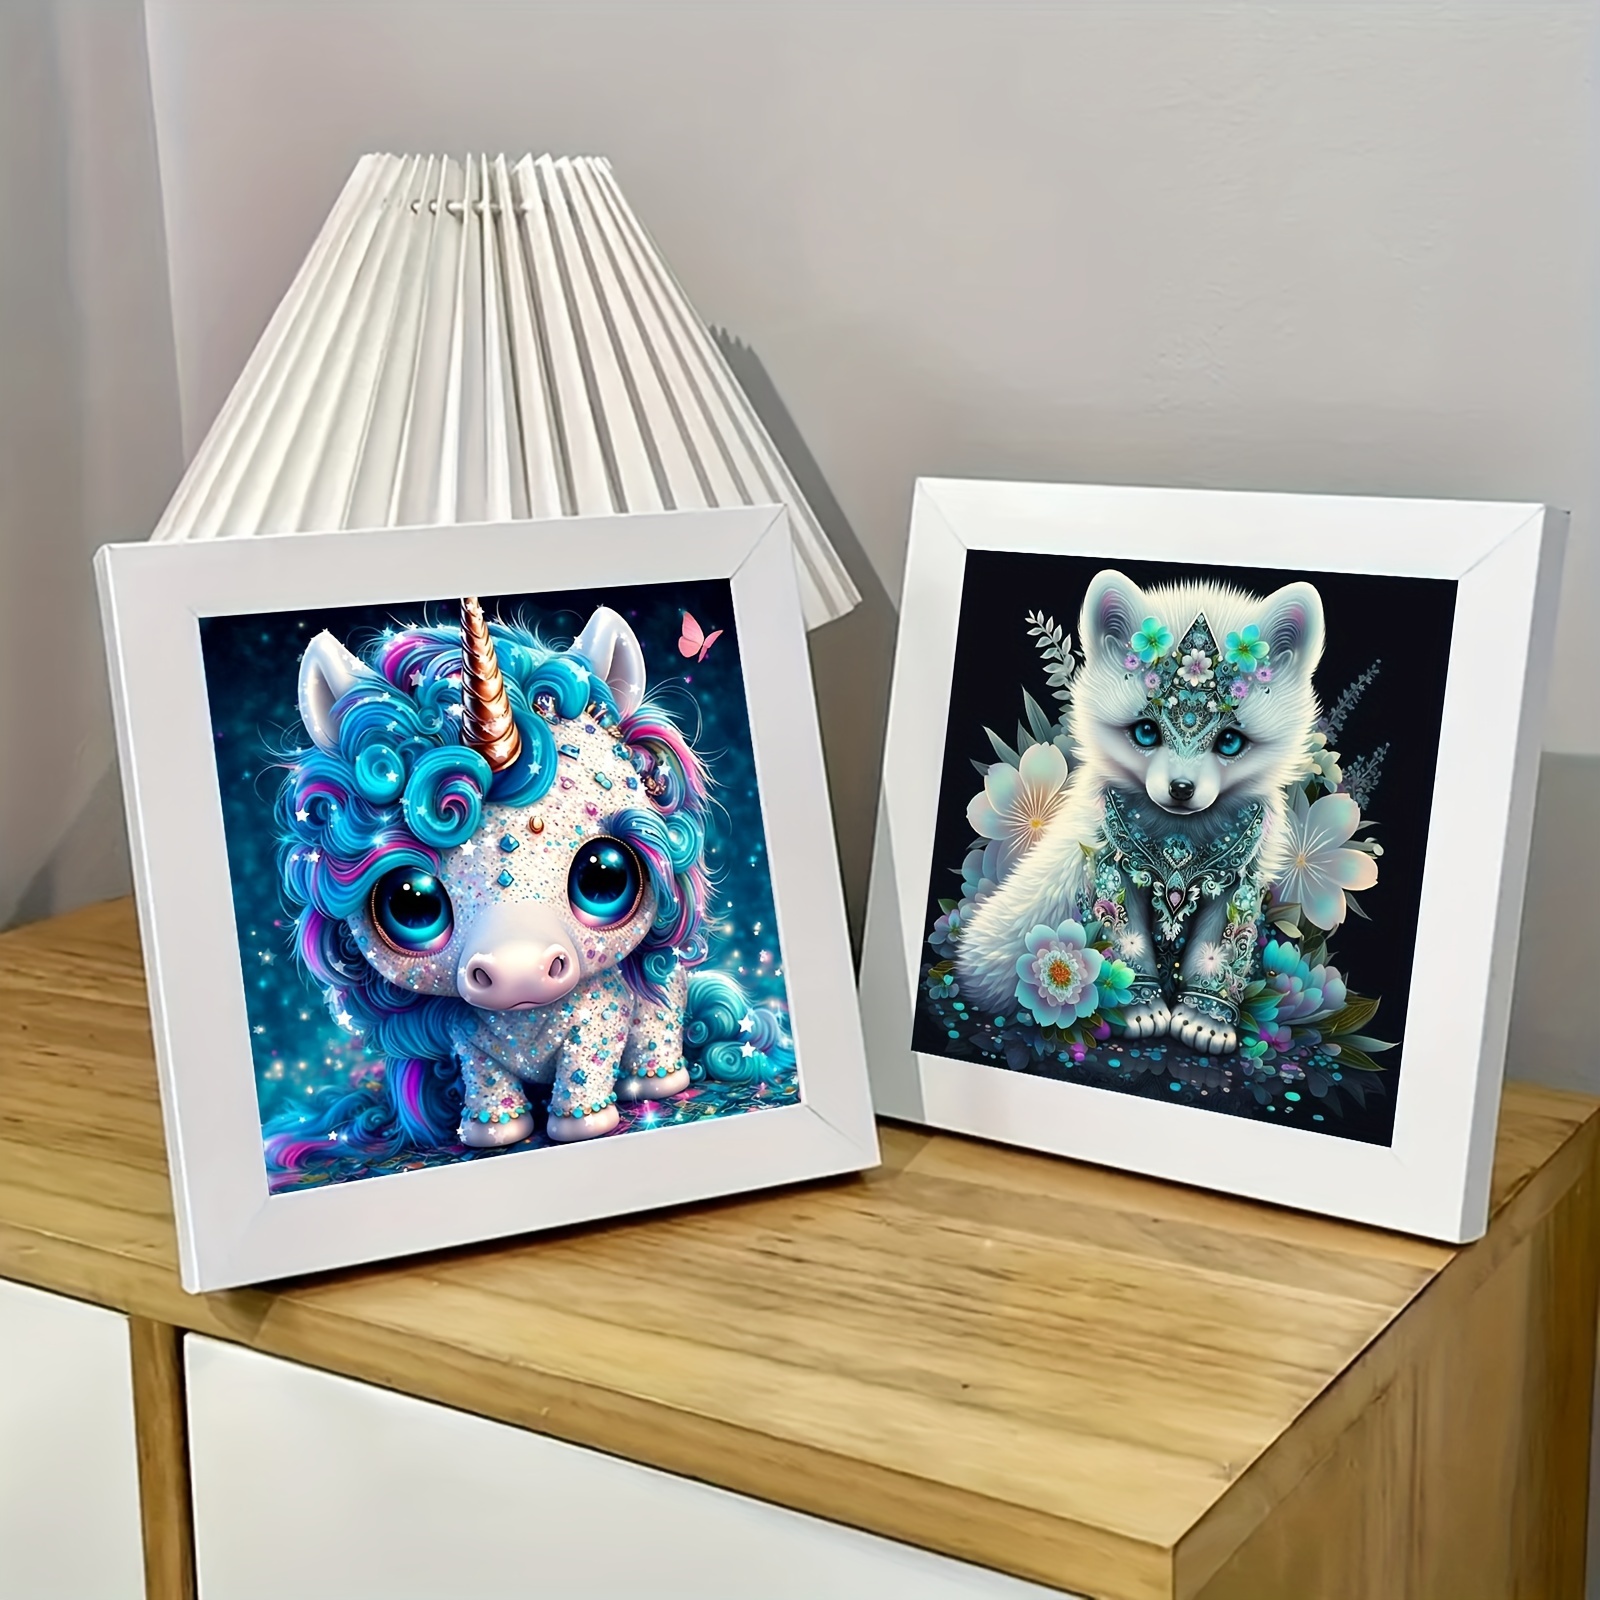 Mimik Anime Fox Diamond Painting,Paint by Diamonds for Adults, Diamond Art  with Accessories & Tools,Wall Decoration Crafts,Relaxation and Home Wall